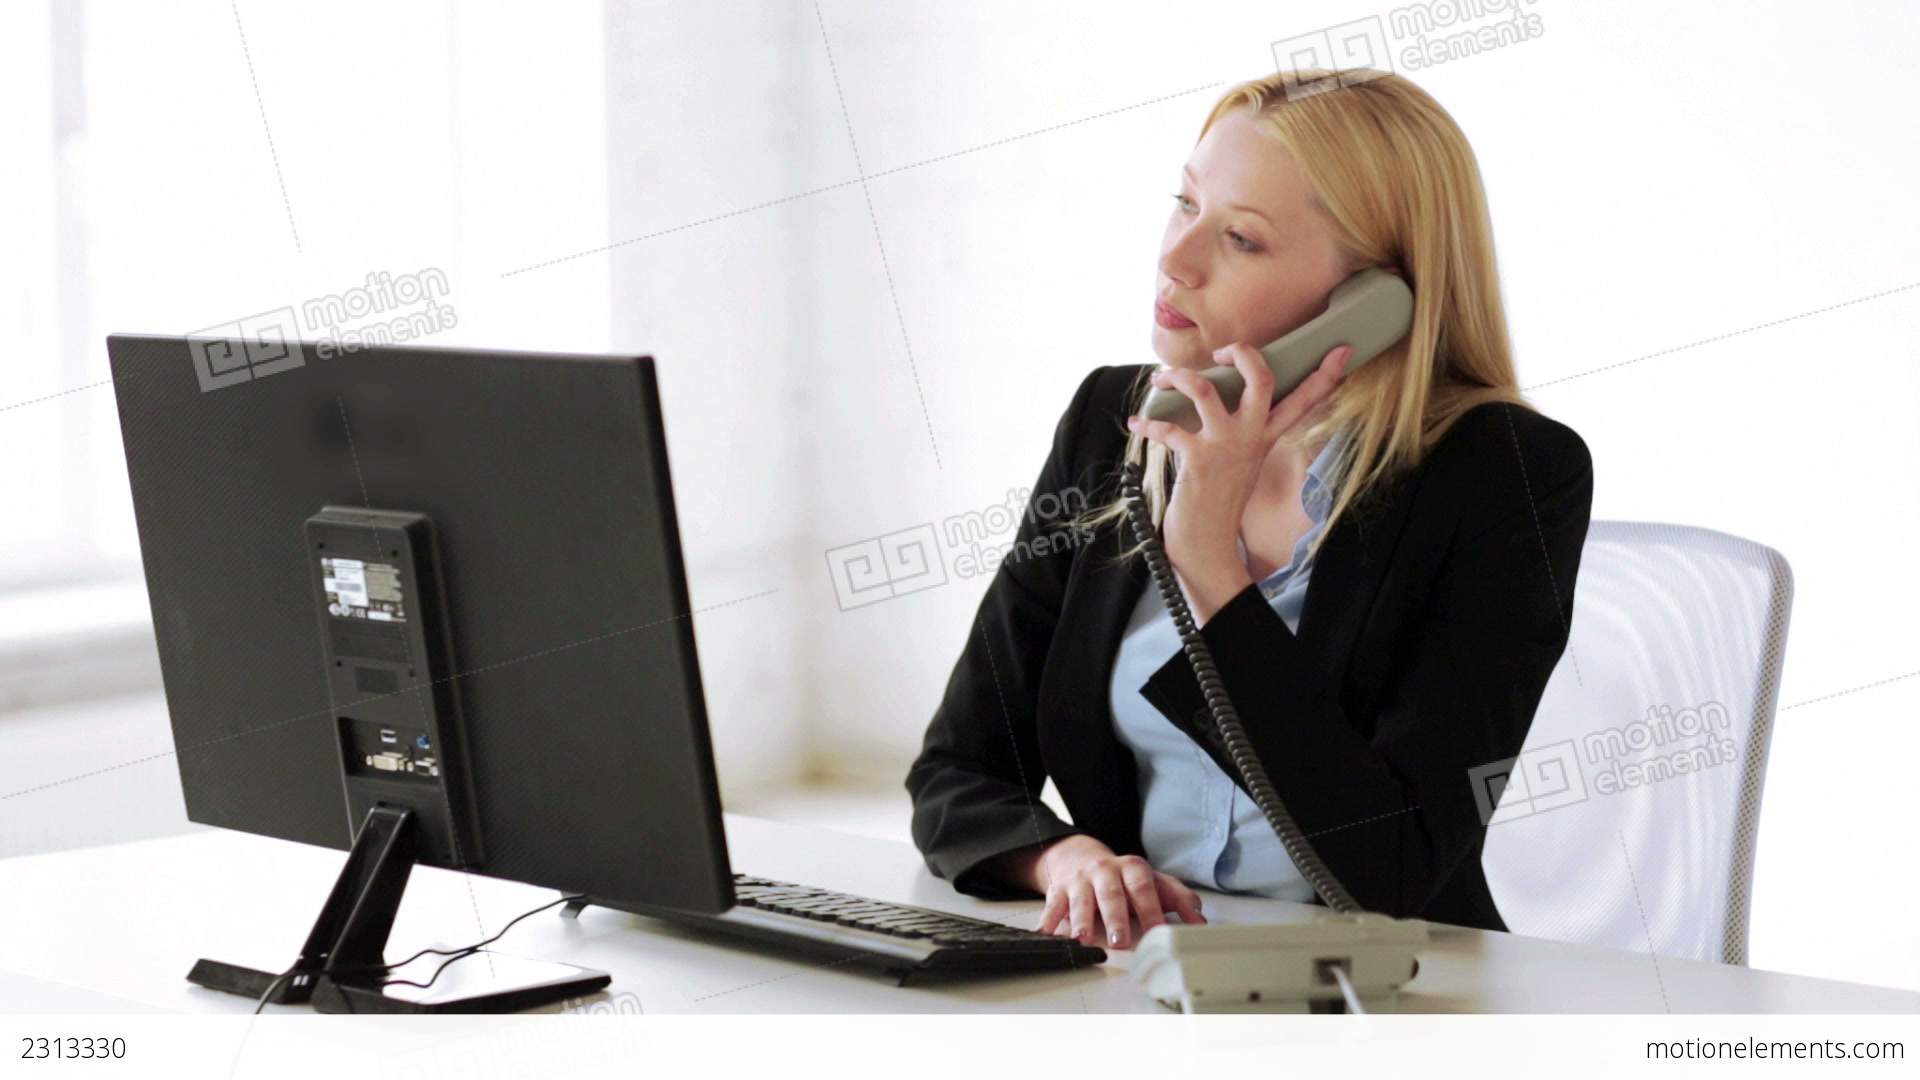 Attractive Office Worker Taking Phone Call Stock video footage | 2313330